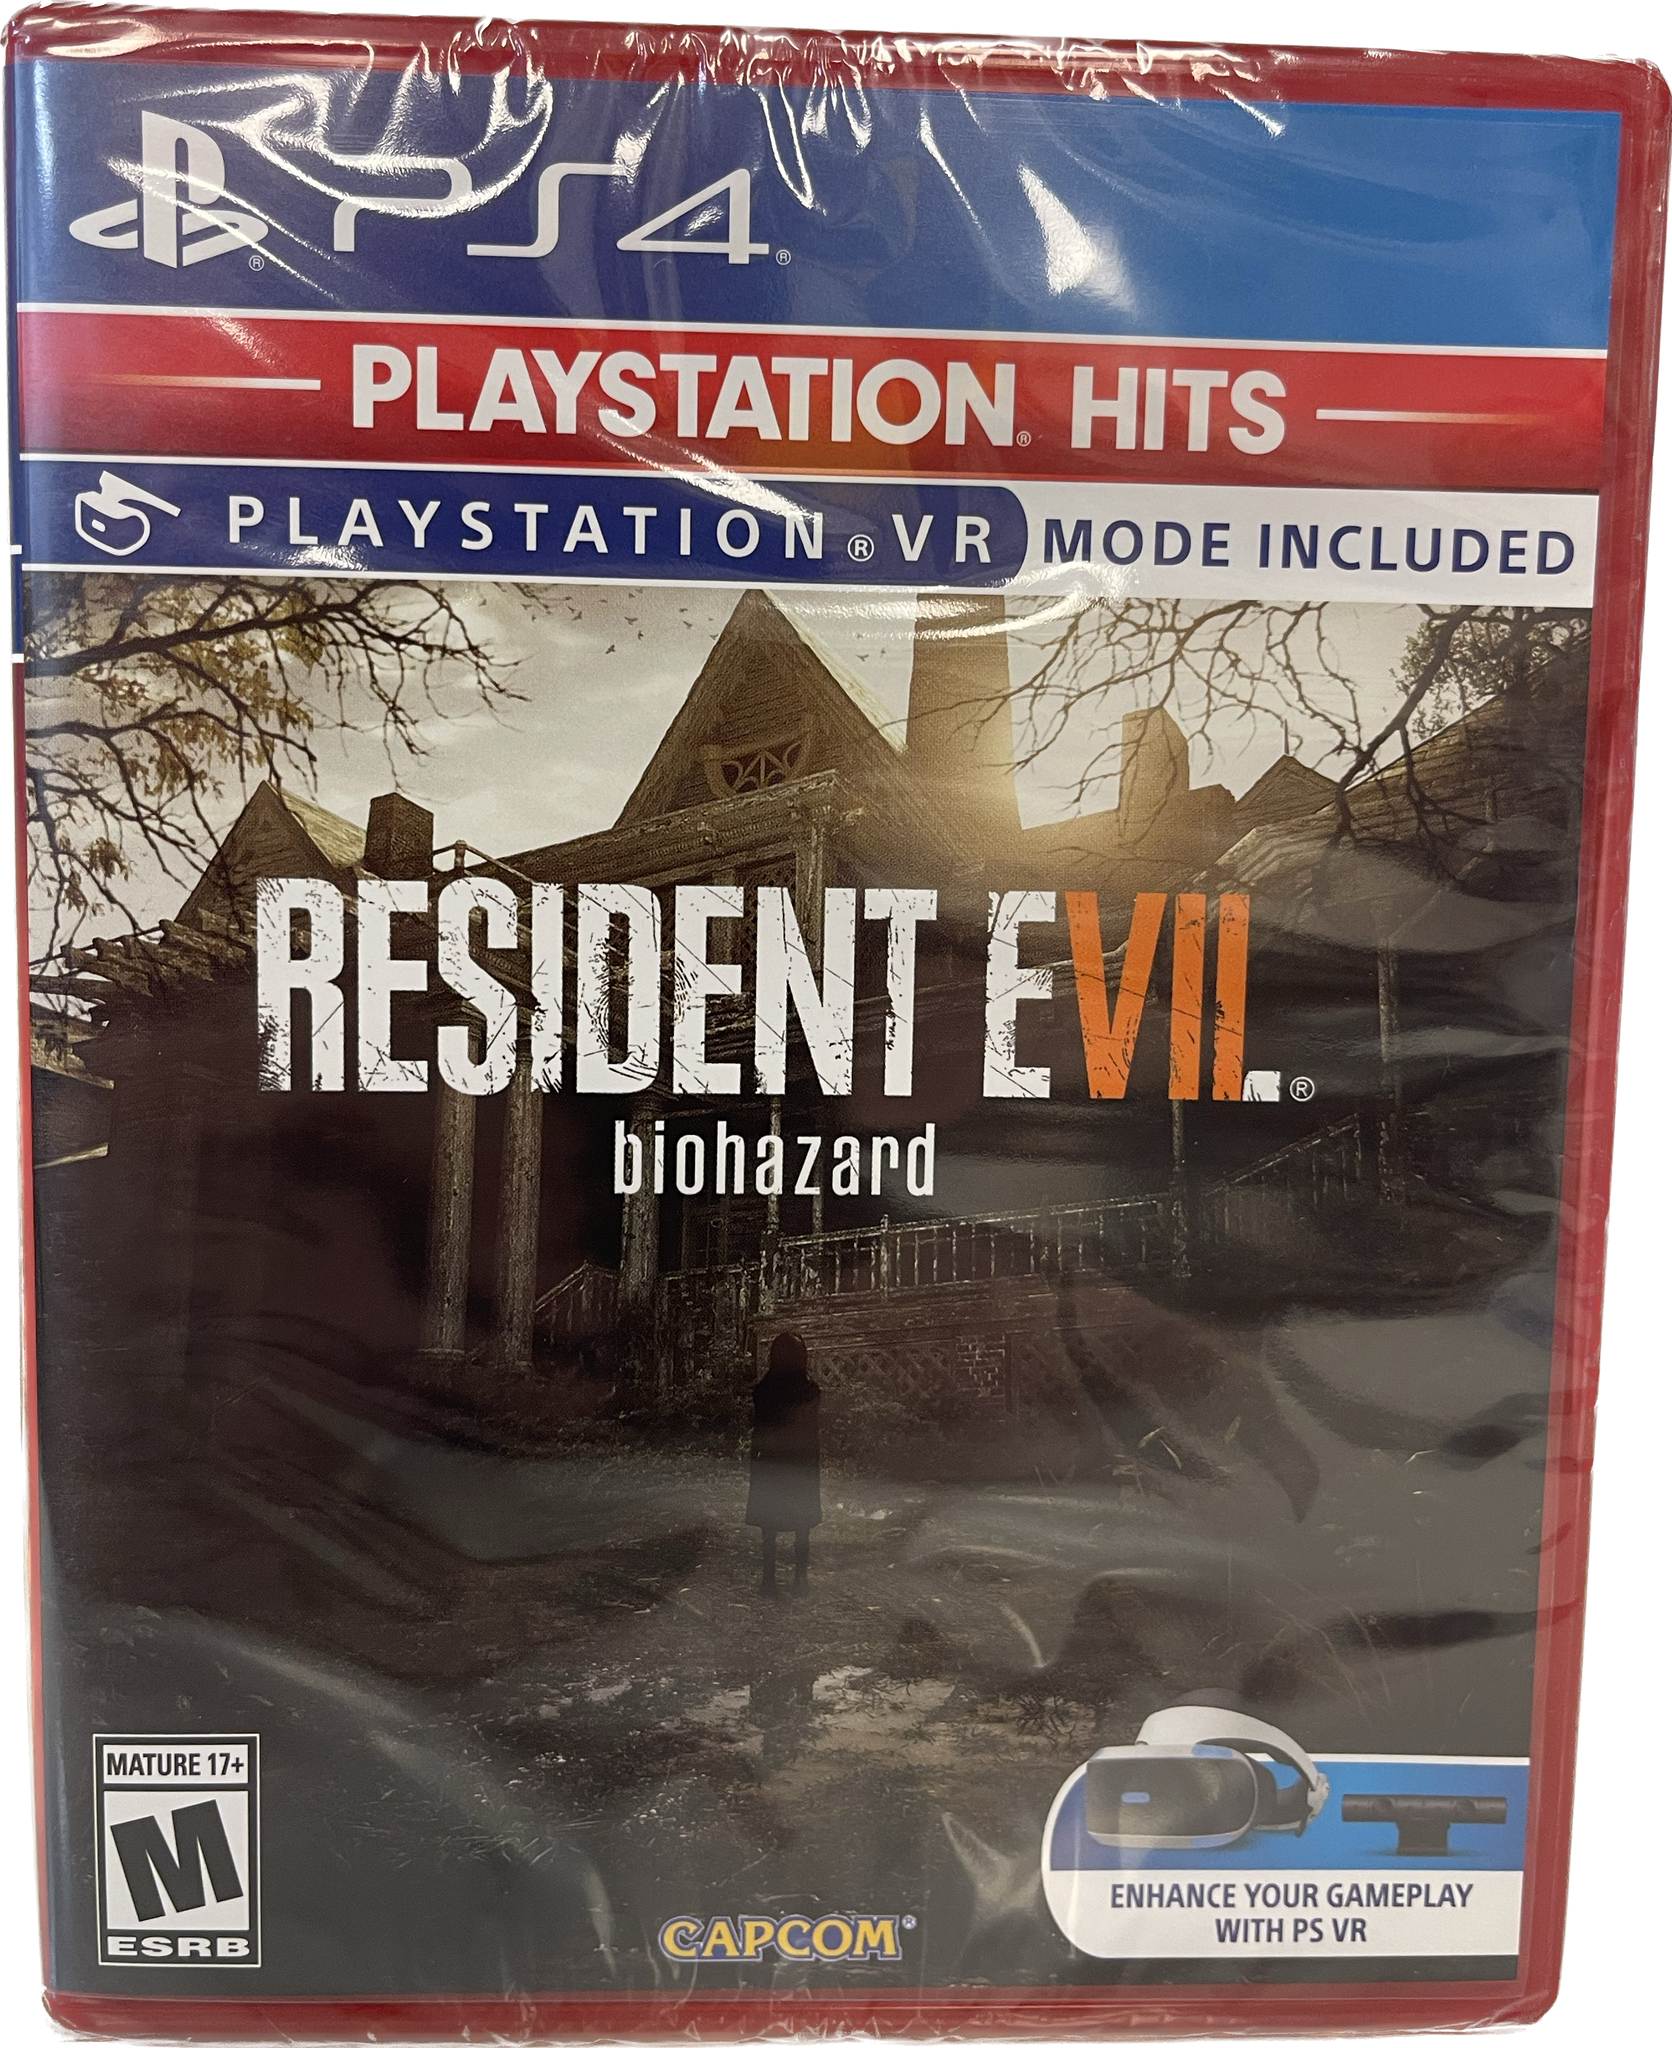 Playstation 4 PS Hits Resident Evil Biohazard New In Box Sealed PS4